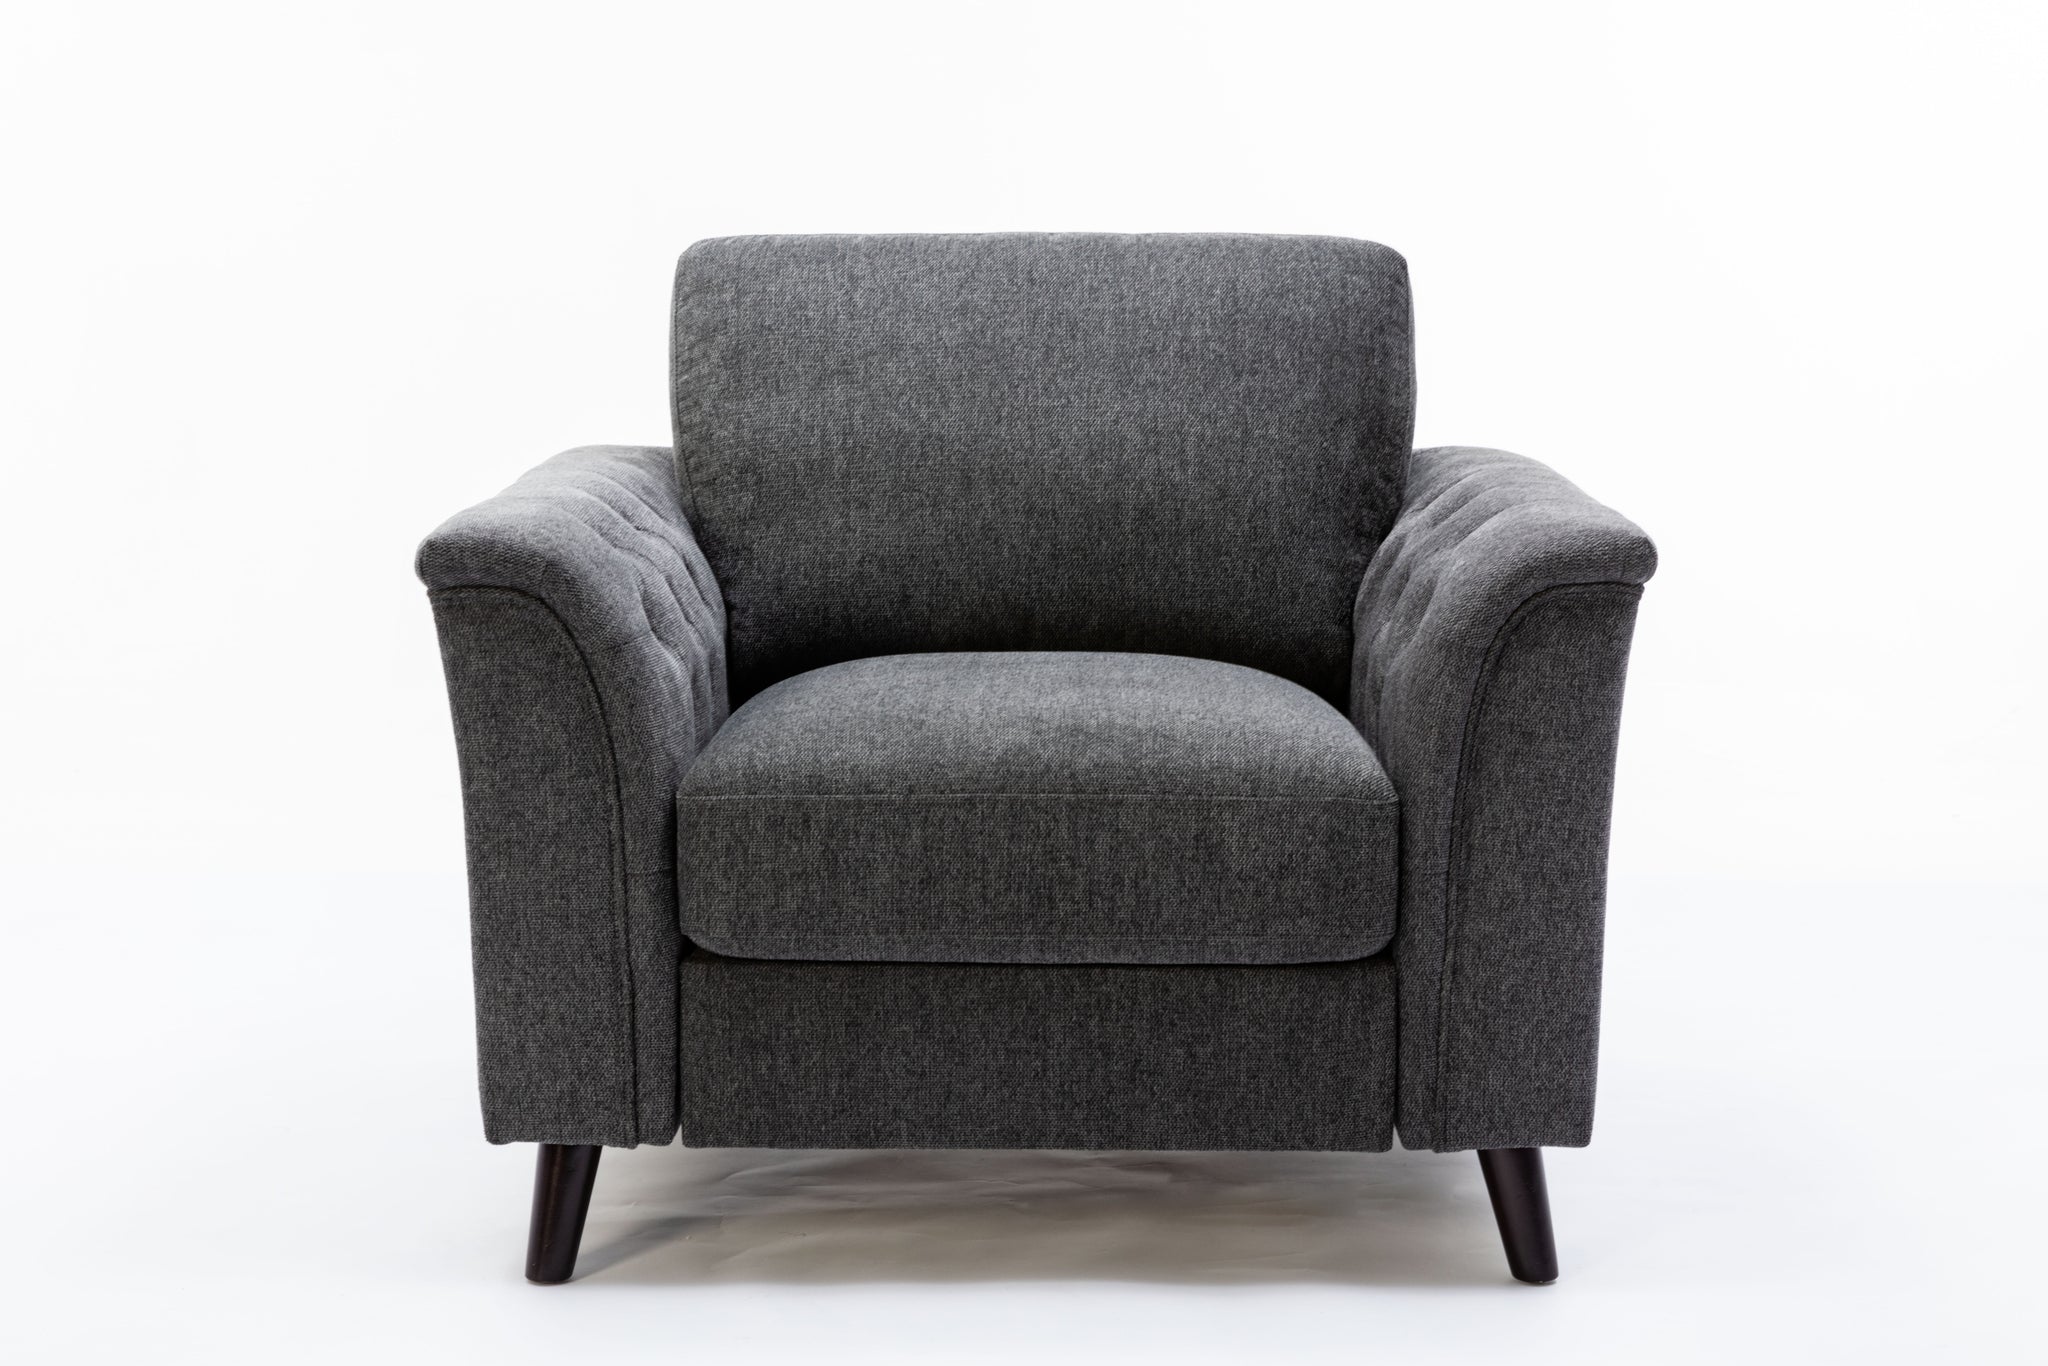 Stanton 36.5" Dark Gray Linen Chair with Tufted